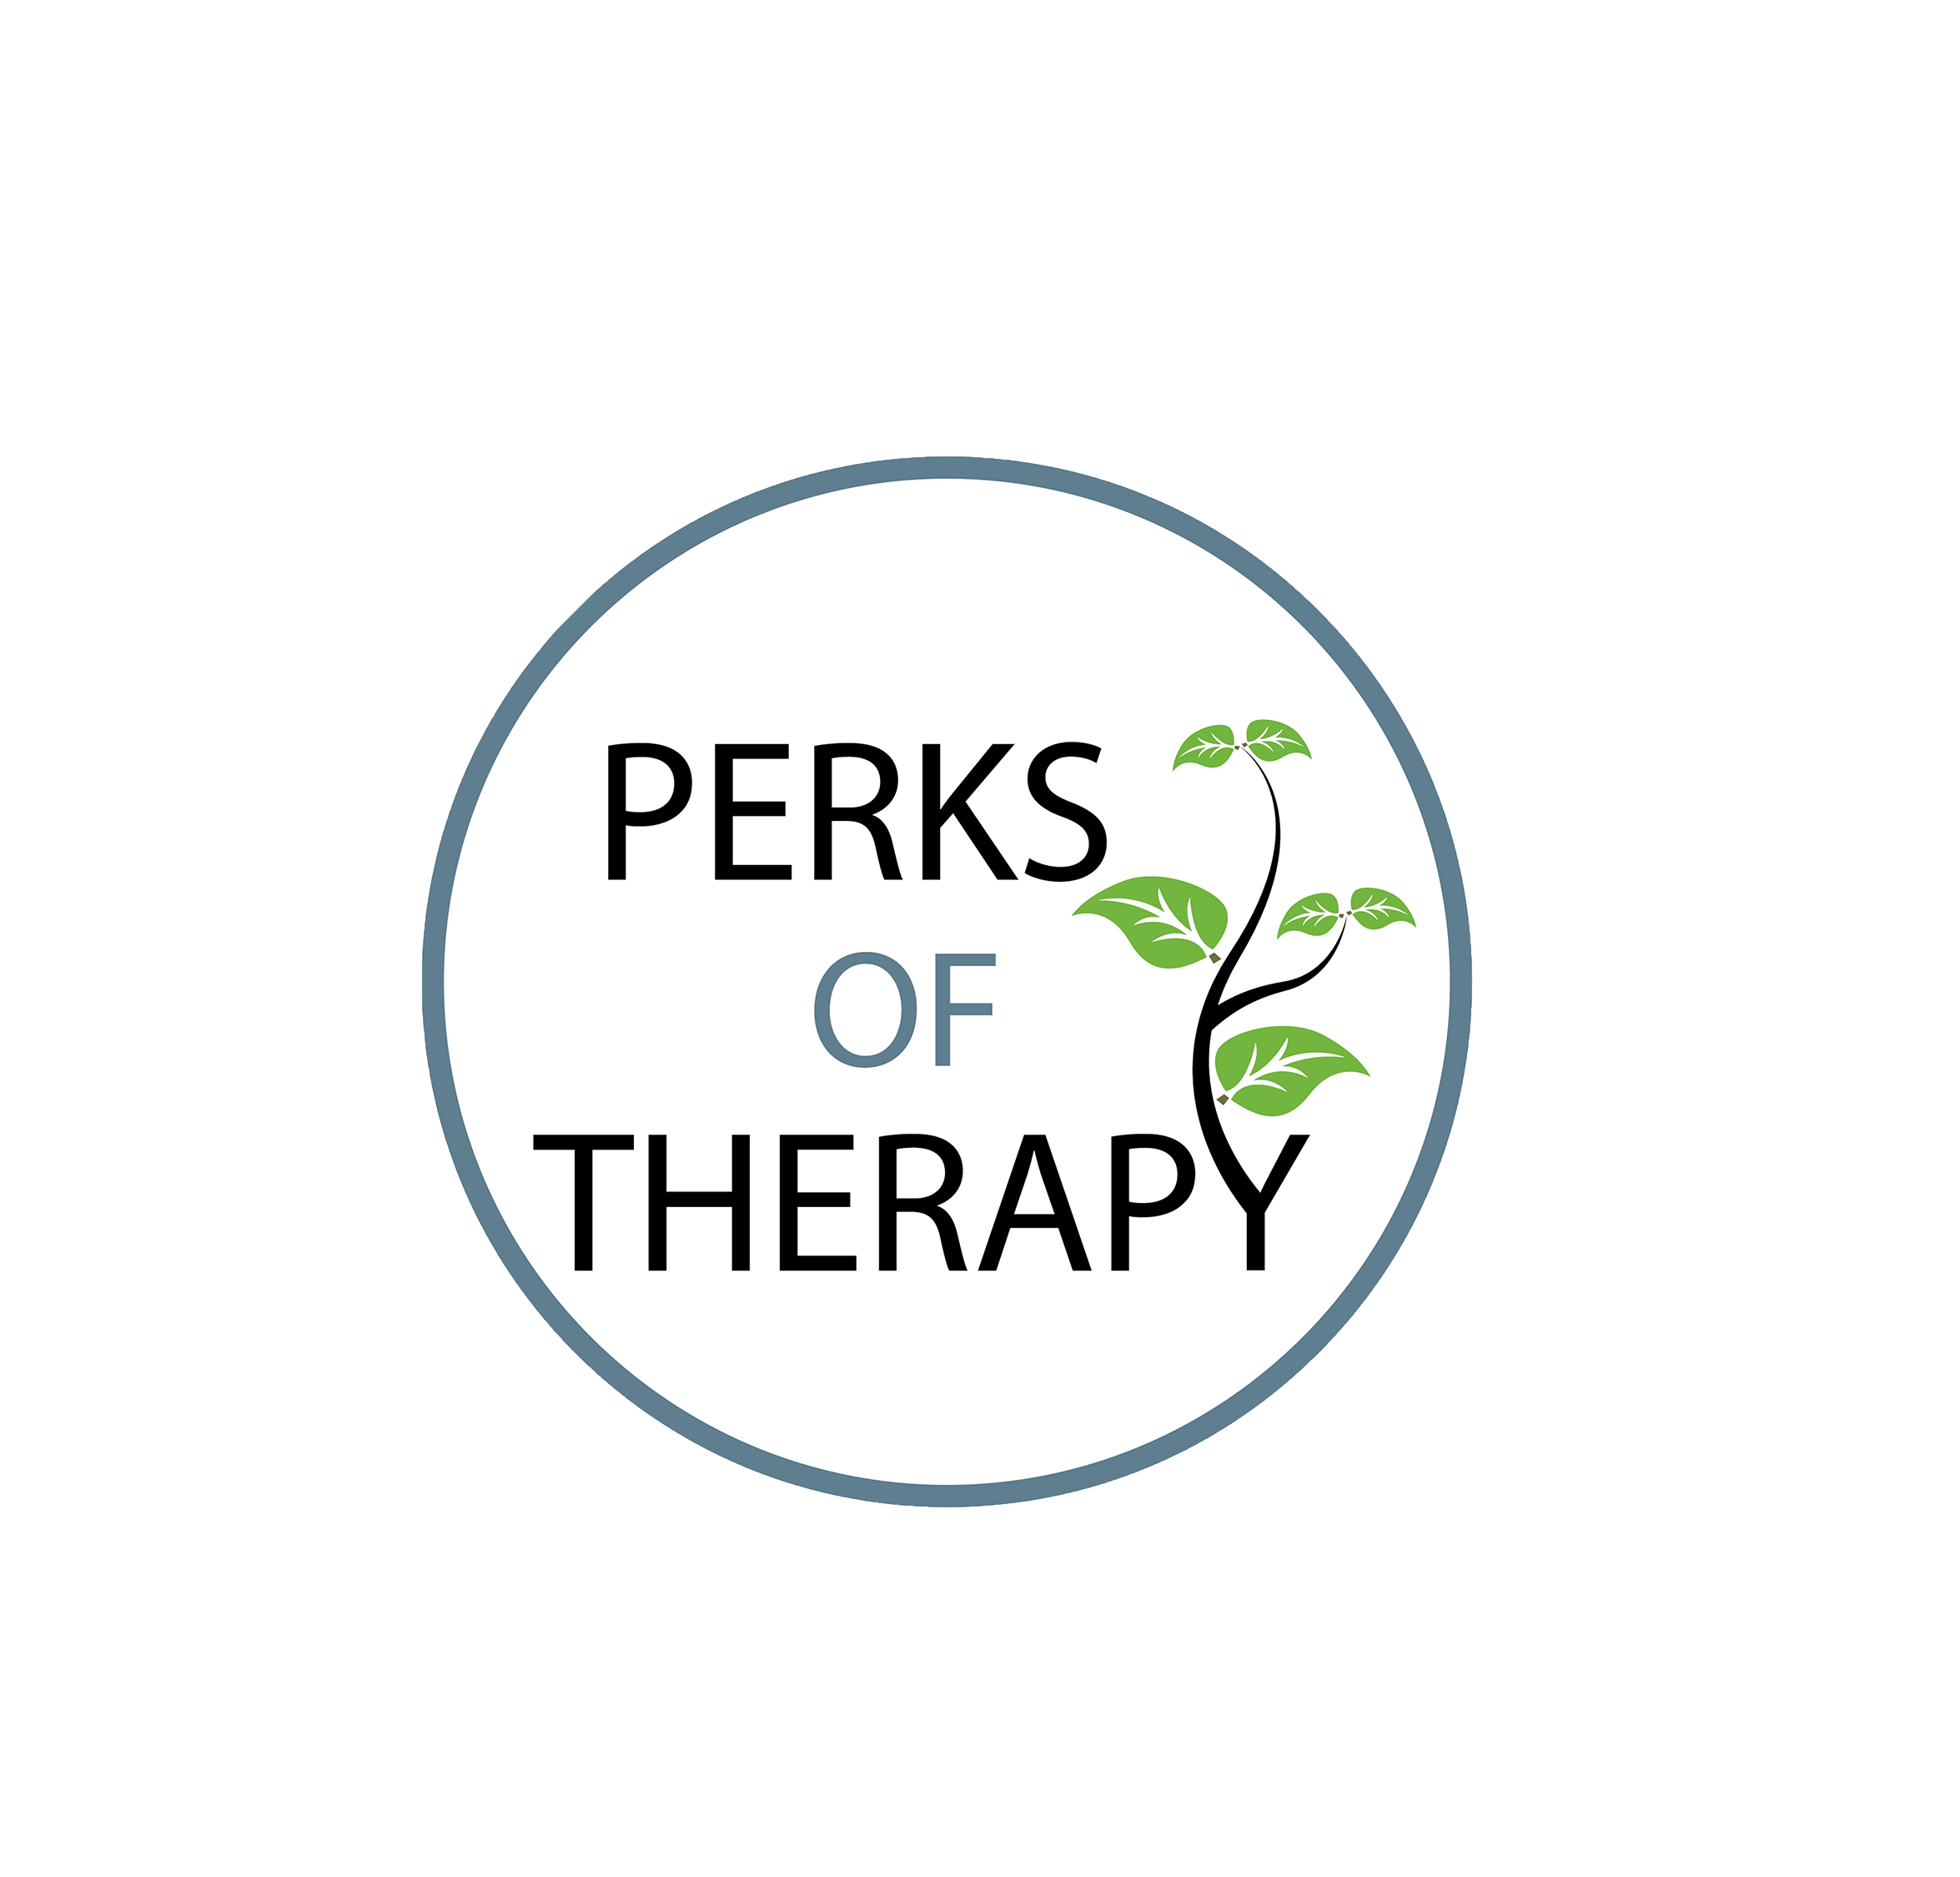 Perks of Therapy LLC